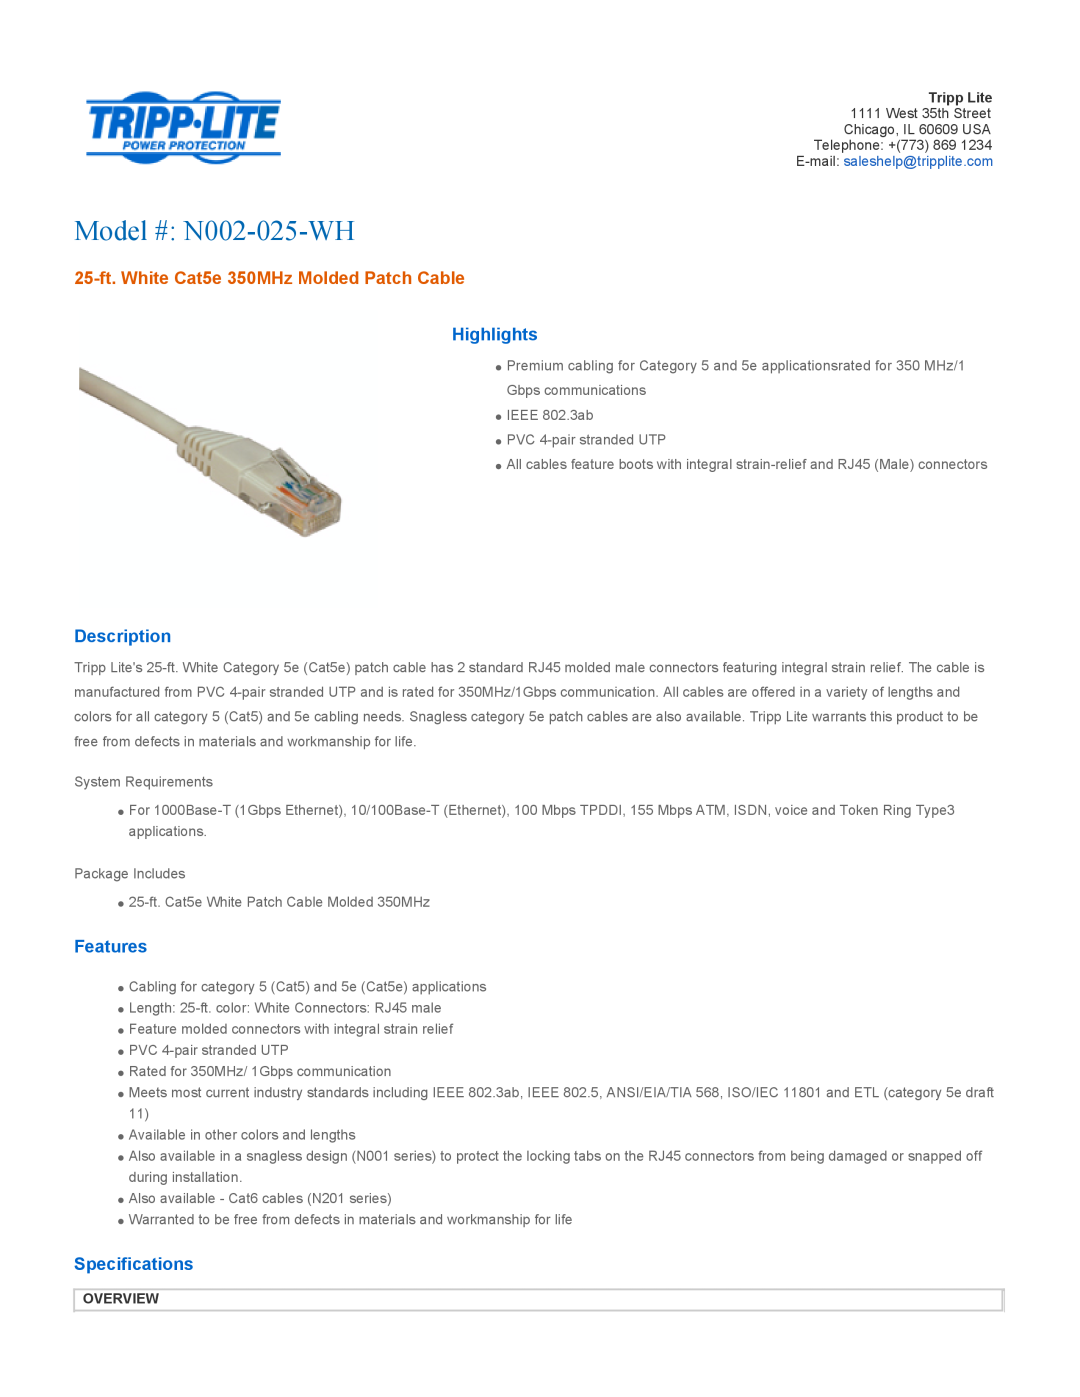 Tripp Lite specifications Overview, Model # N002-025-WH, 25-ft. White Cat5e 350MHz Molded Patch Cable, Highlights 